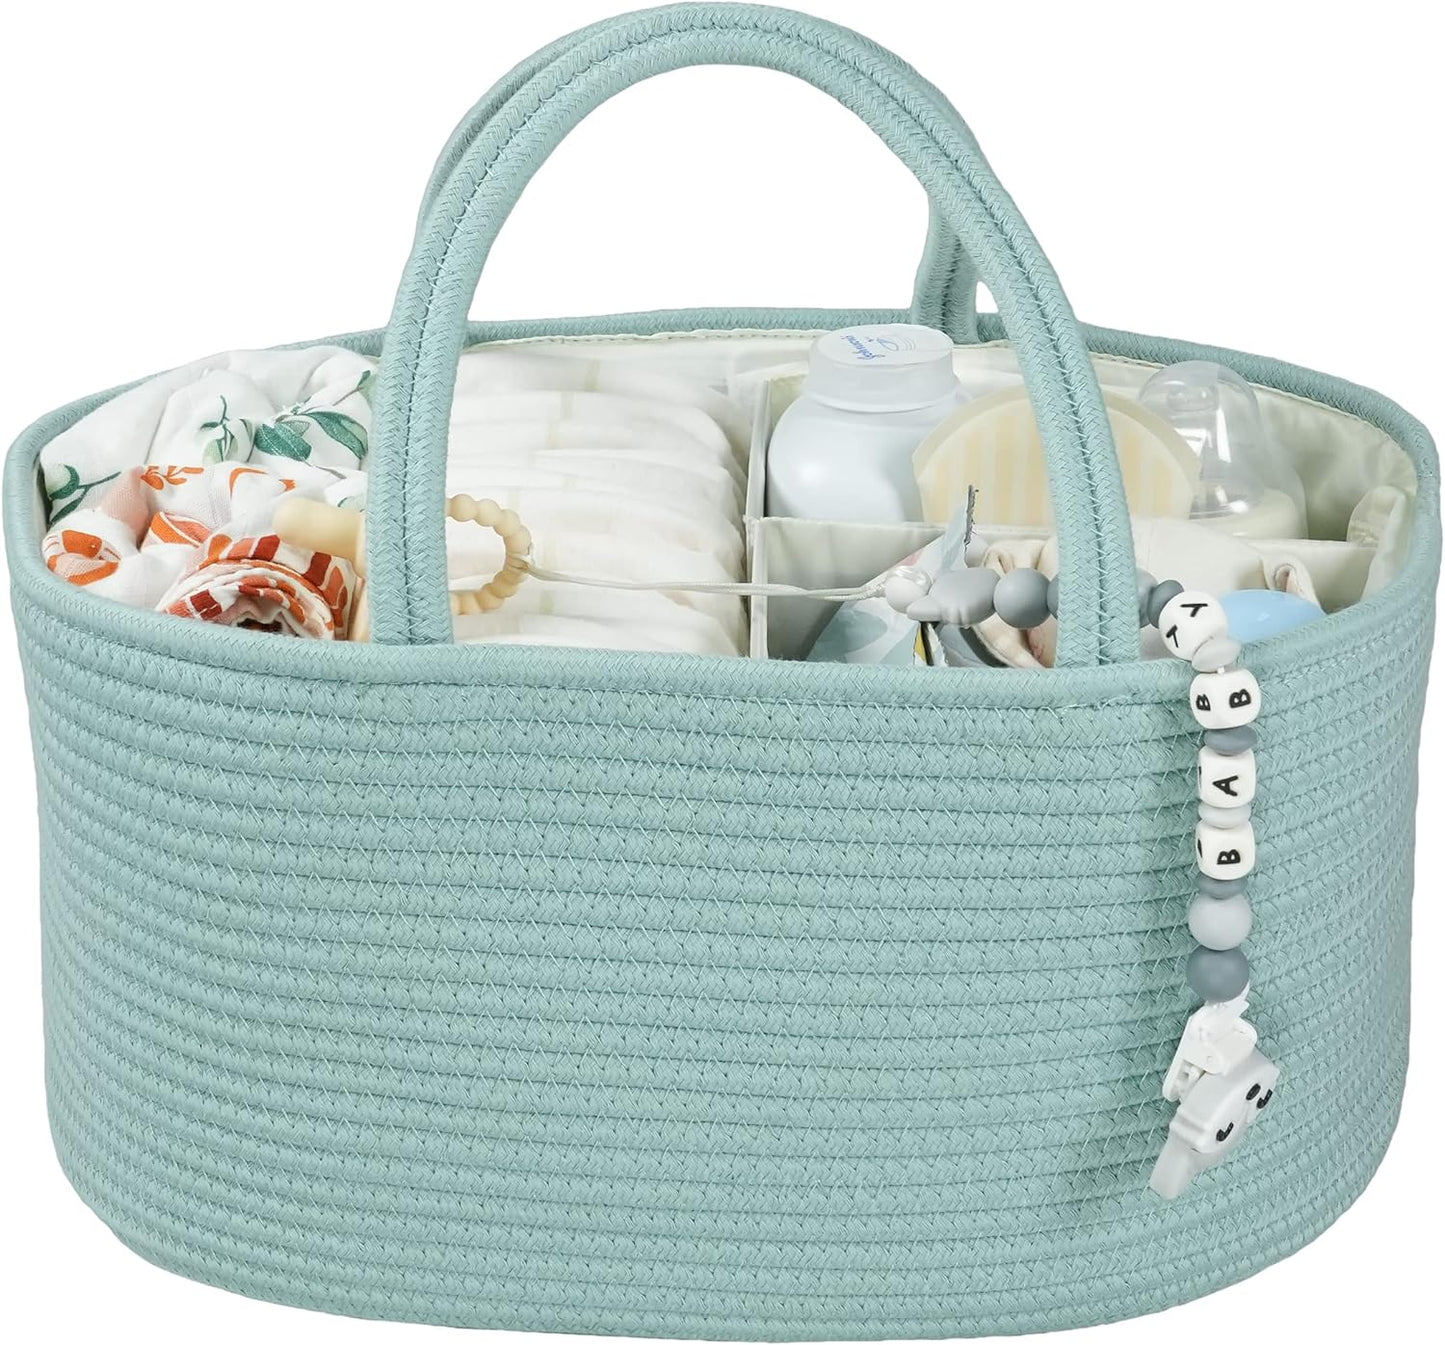 Pink Diaper Caddy 👜 Portable Organizer for Baby Essentials